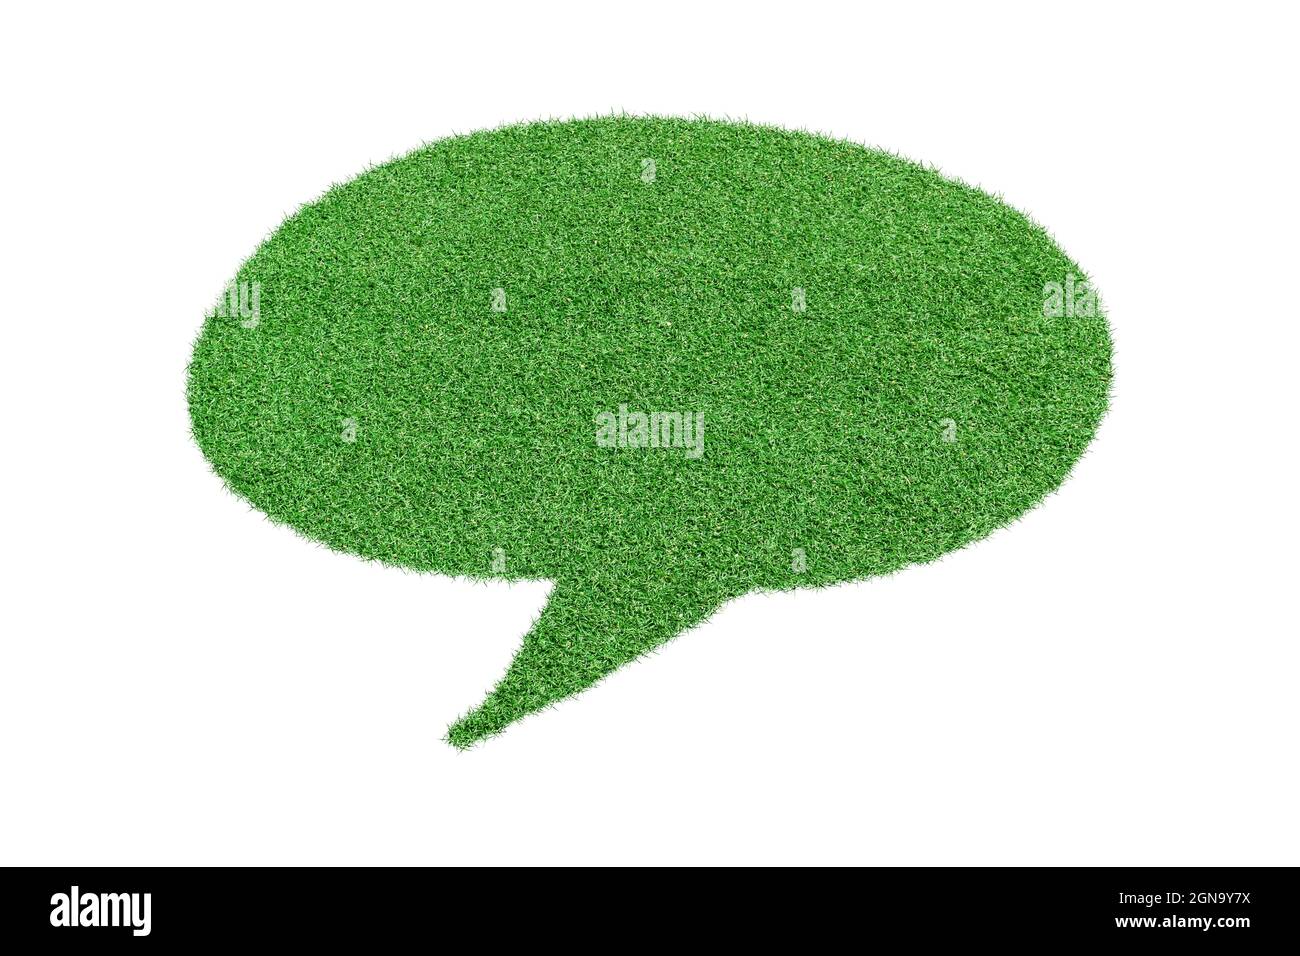 Speech Bubble made from green grass, Isolated on white background Stock Photo